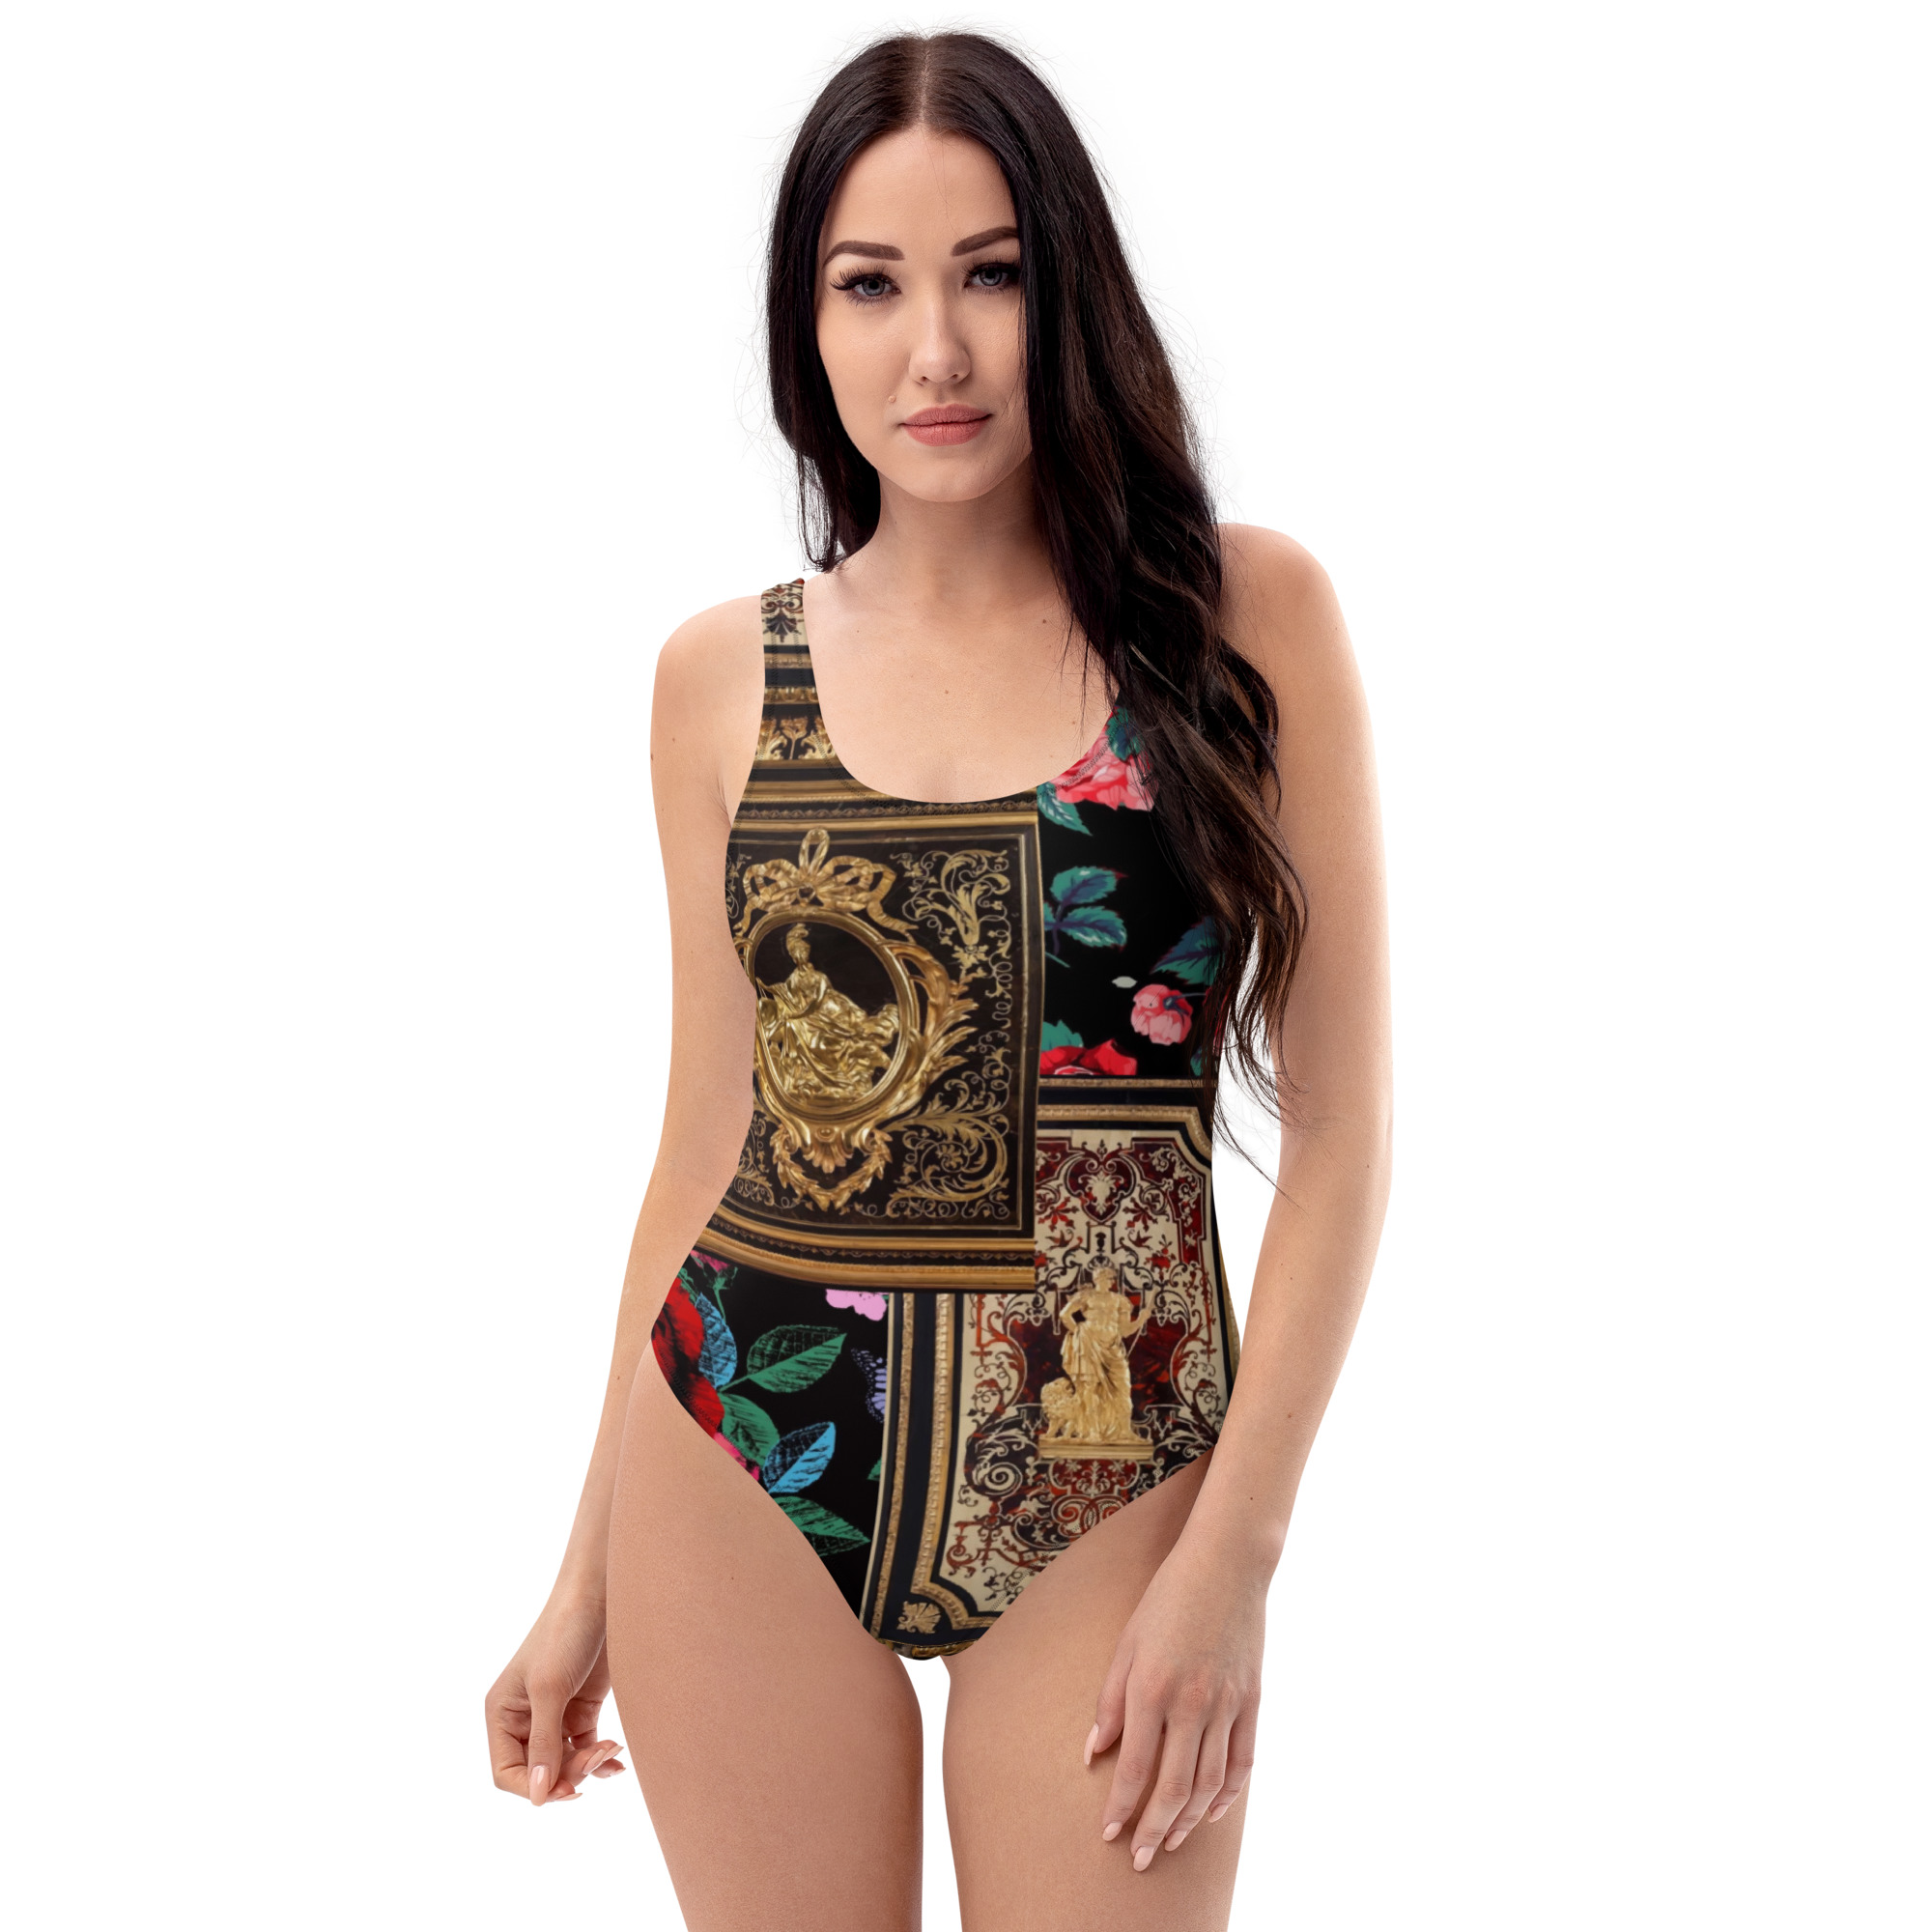 Designer One Piece Swimsuit Bathing Suit for Women | Cute Flattering Swimming Suit | Black Gold Floral